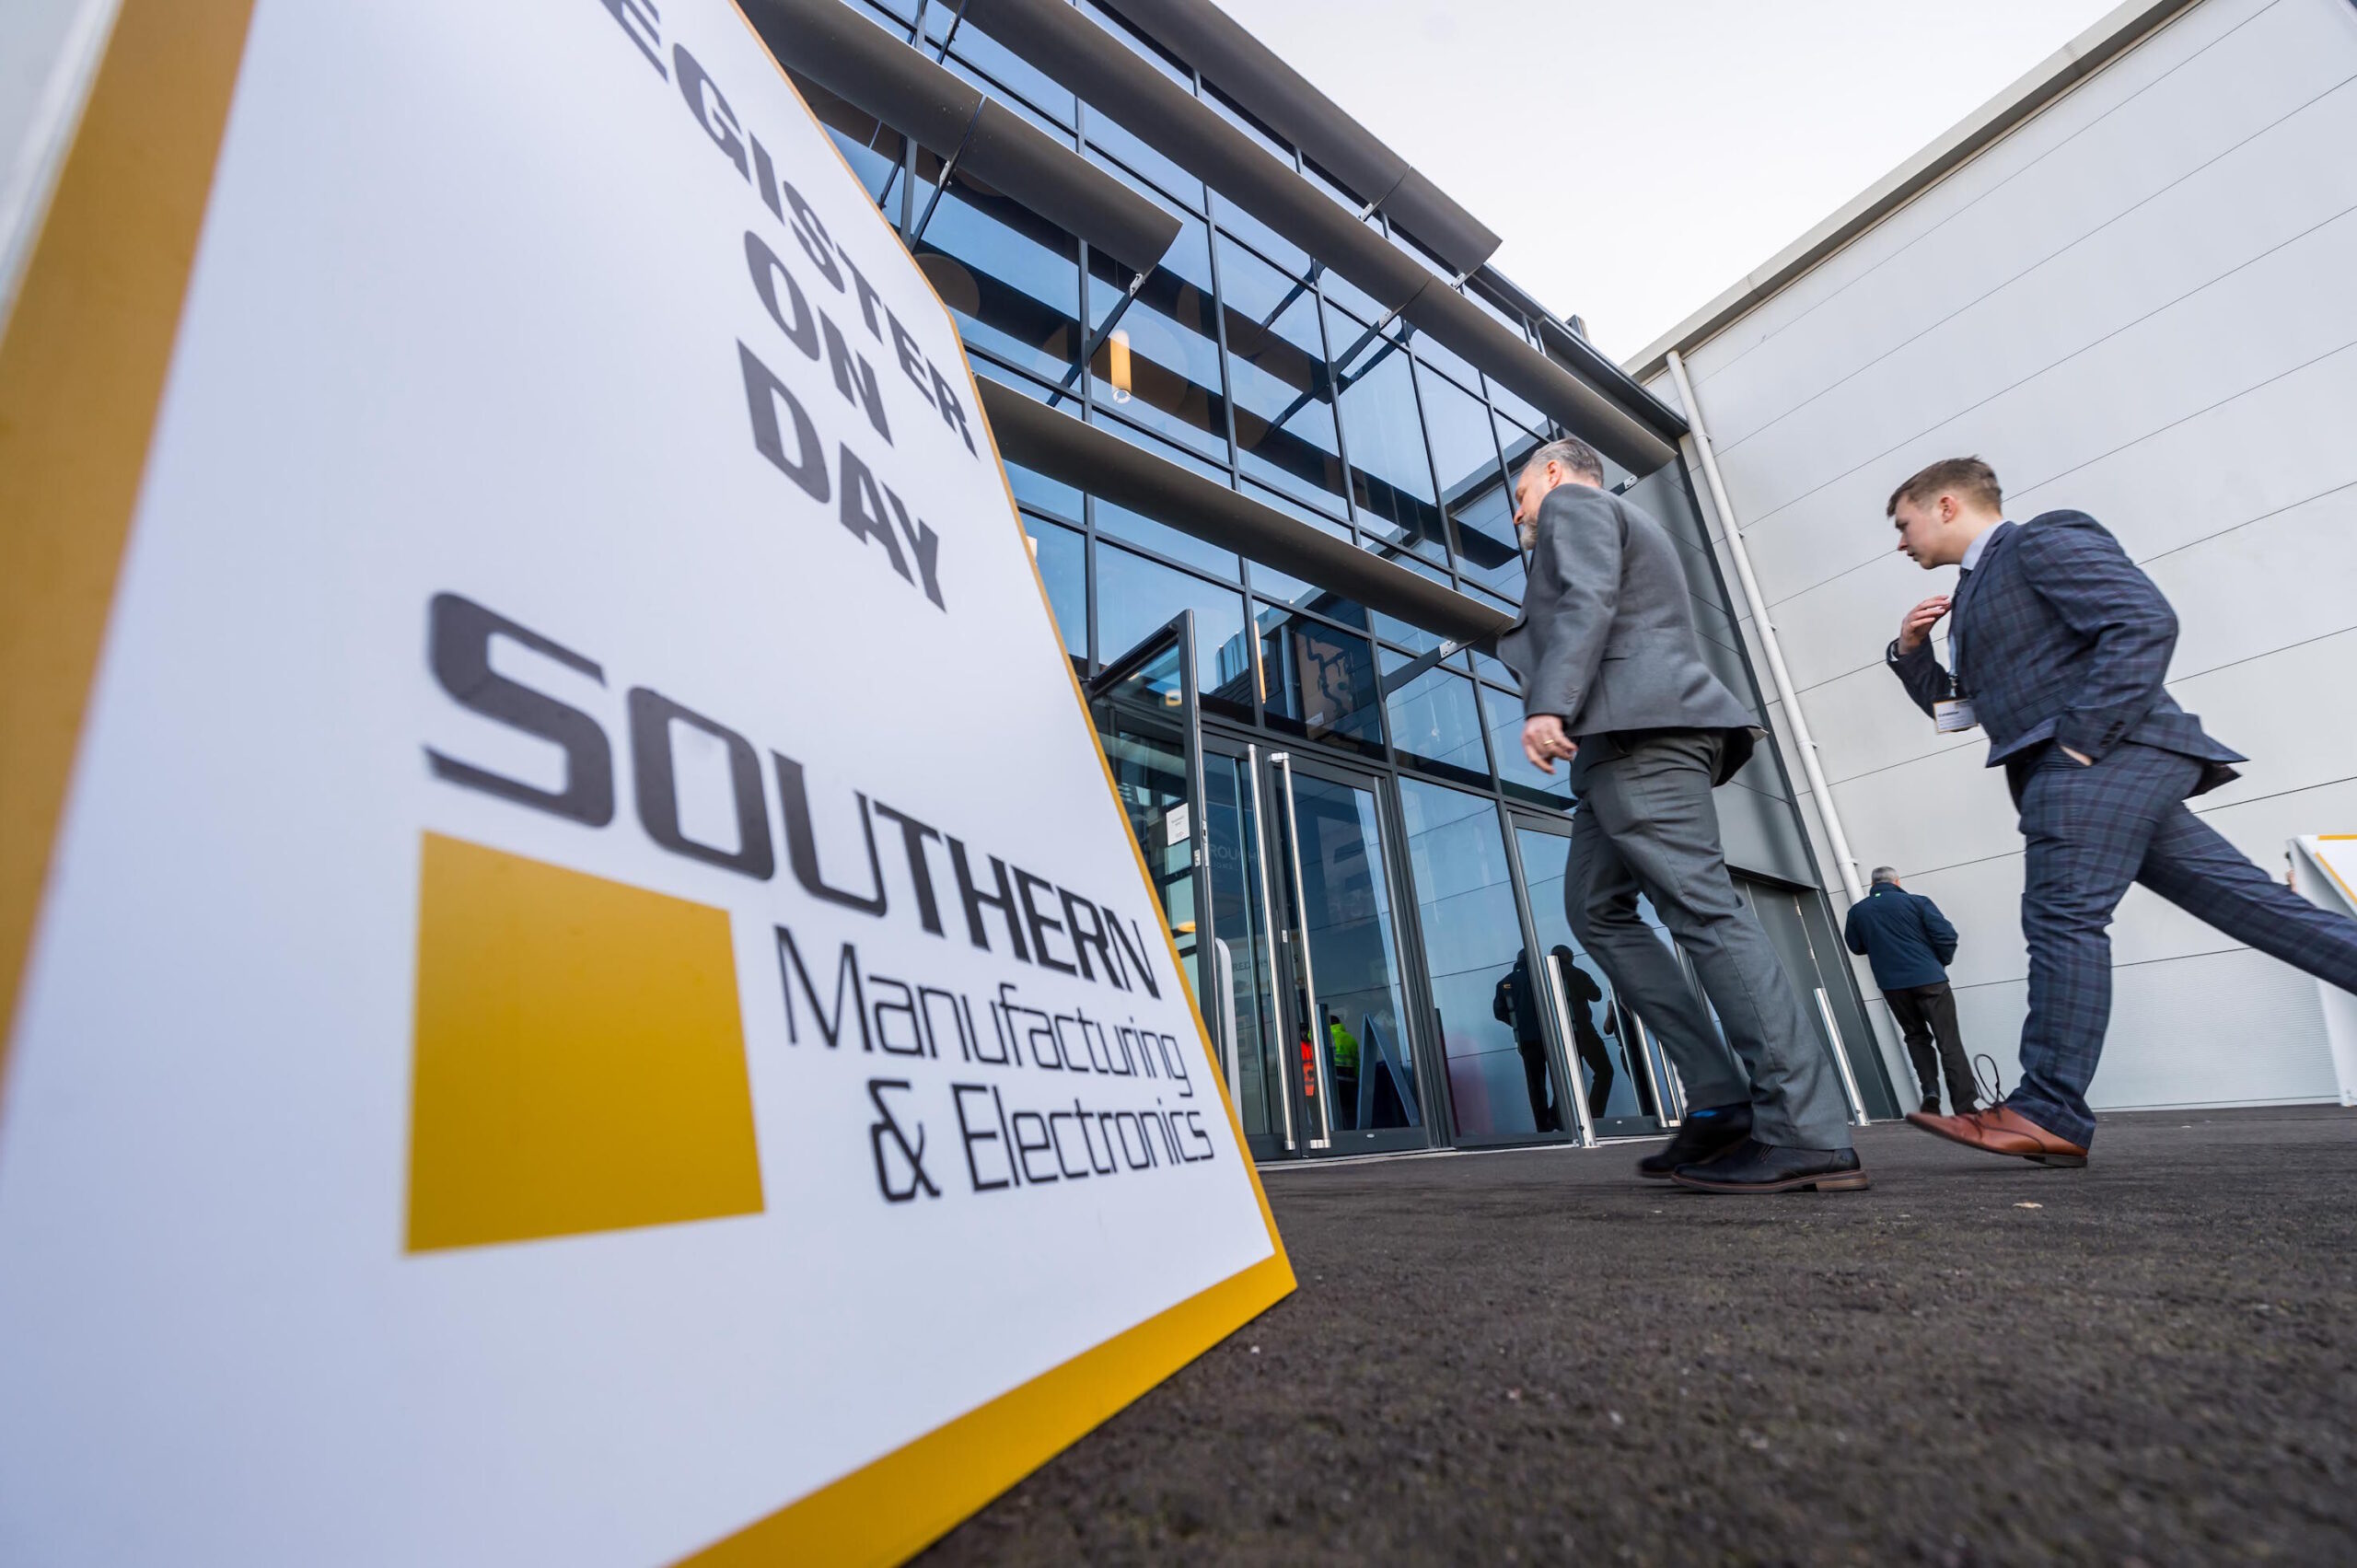 Southern Manufacturing 2022 opens its doors